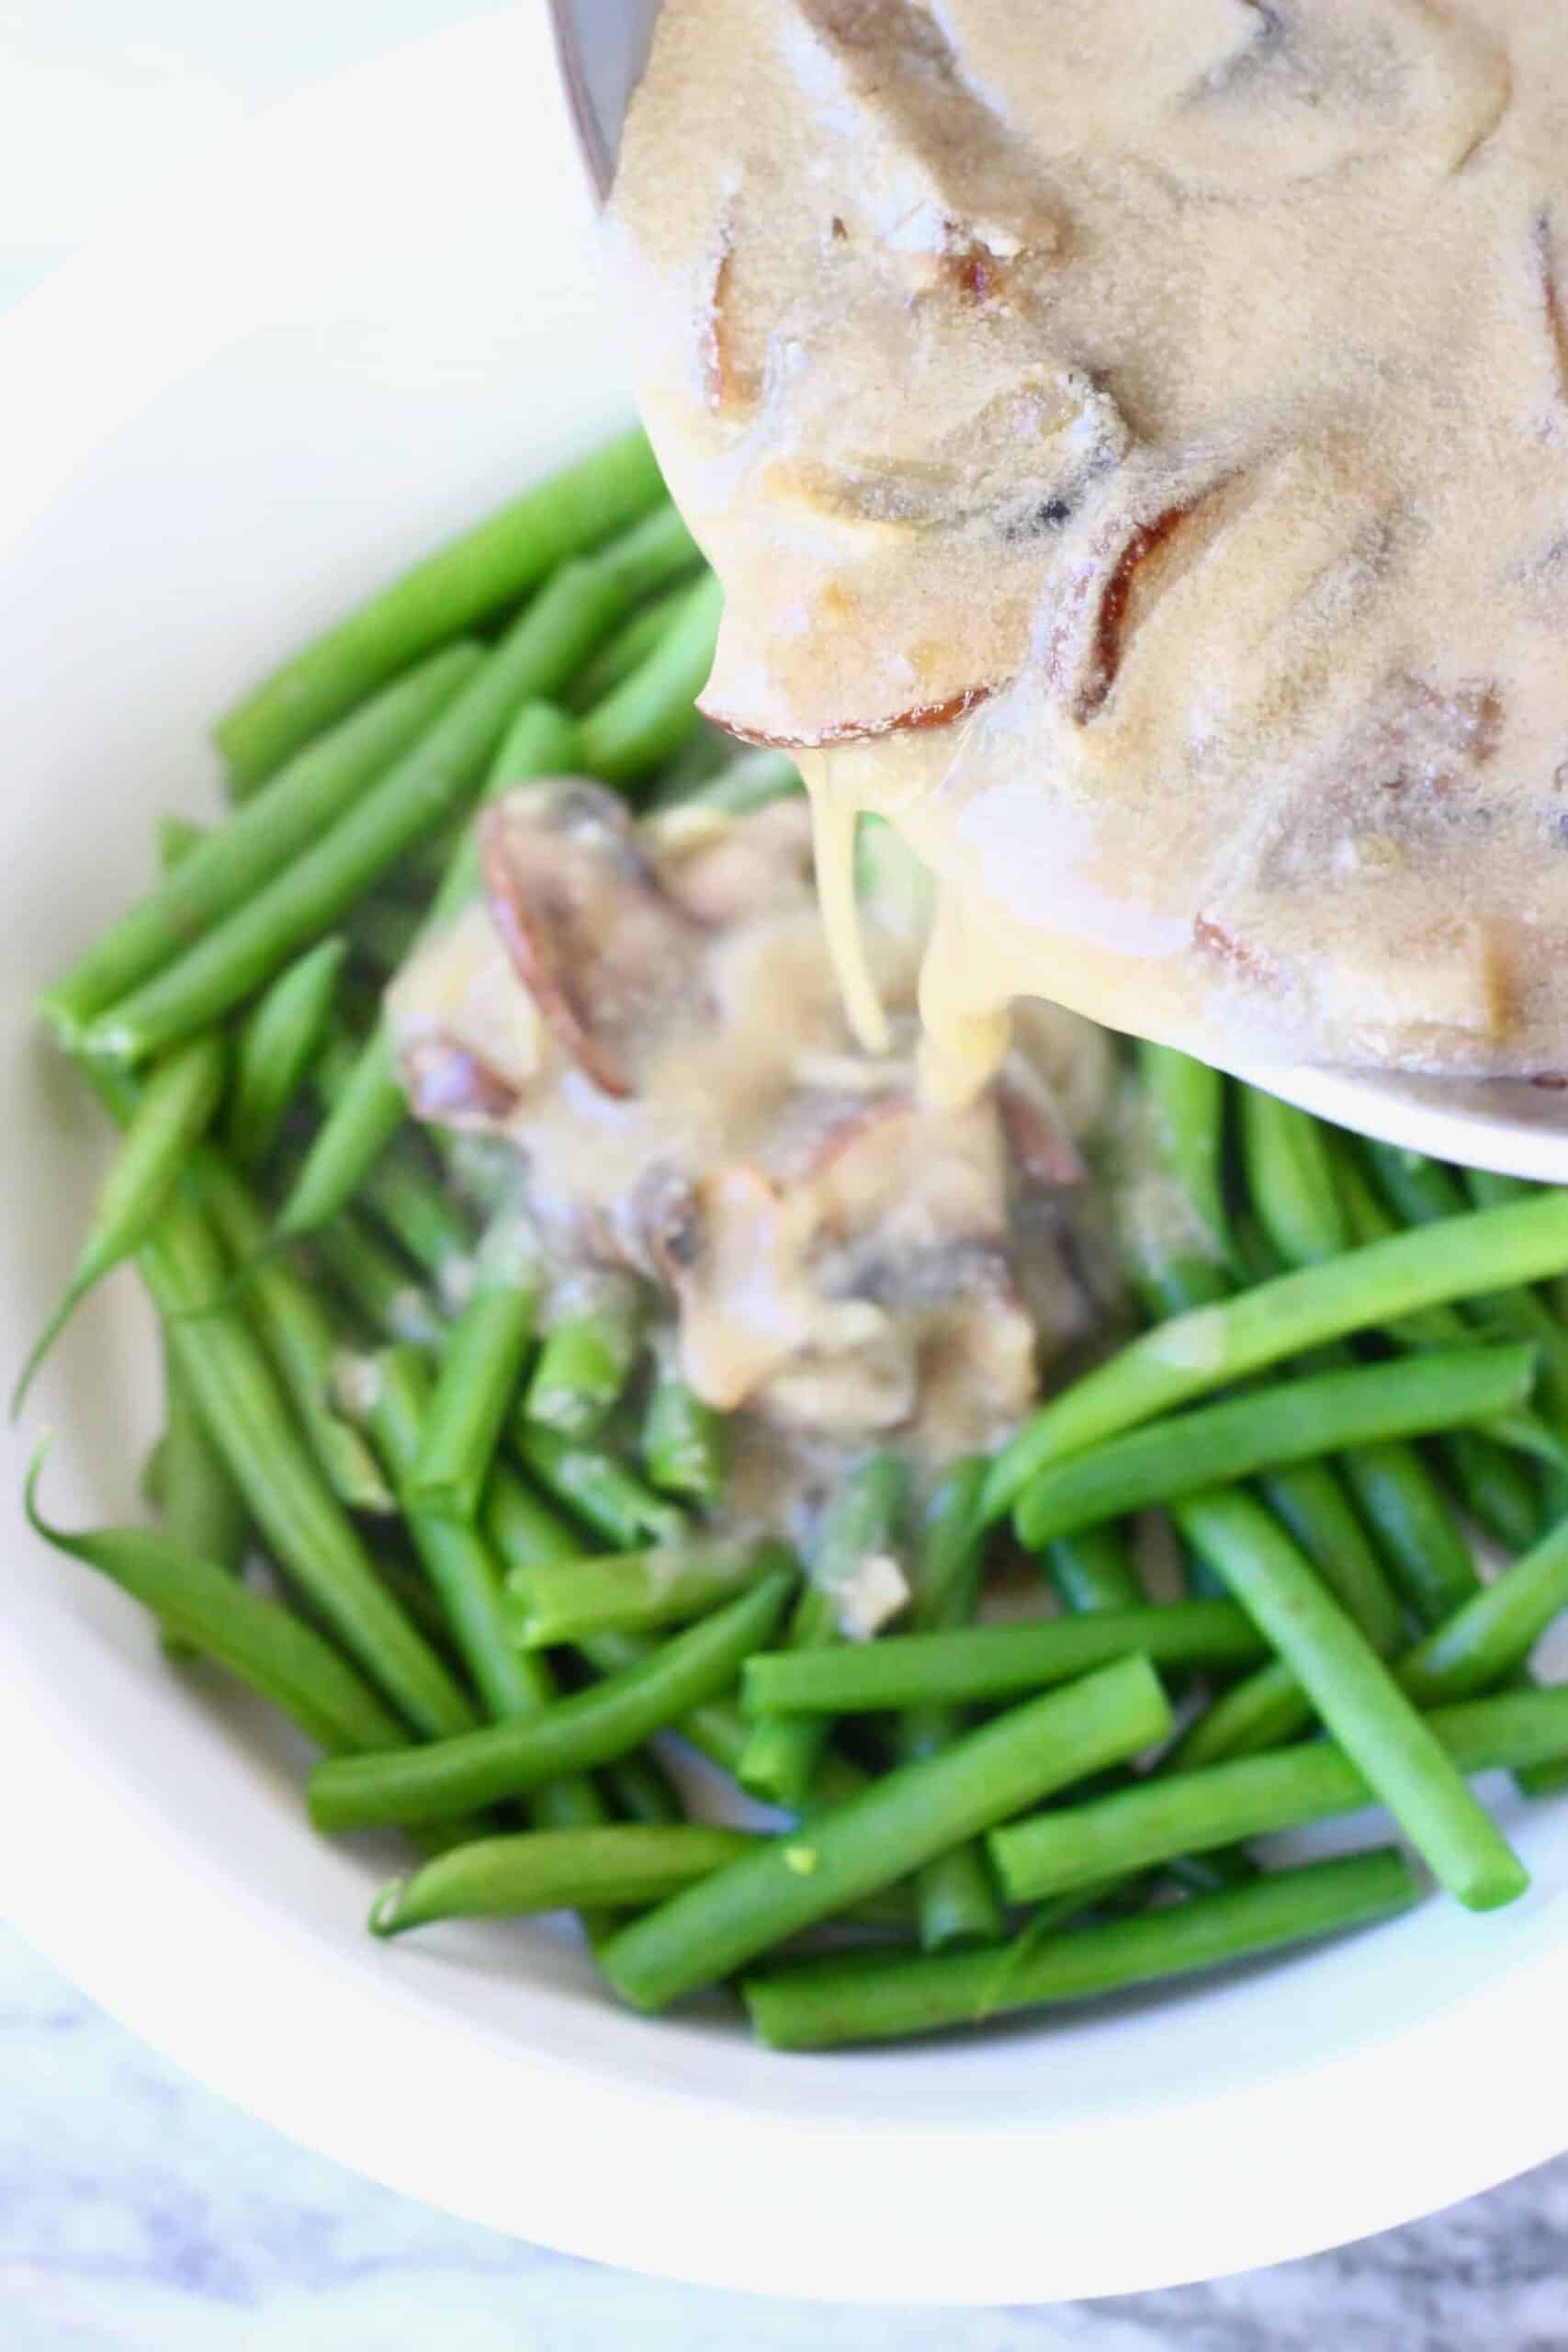 Green beans in a pie dish with a pan pouring over sliced mushrooms in a creamy brown sauce